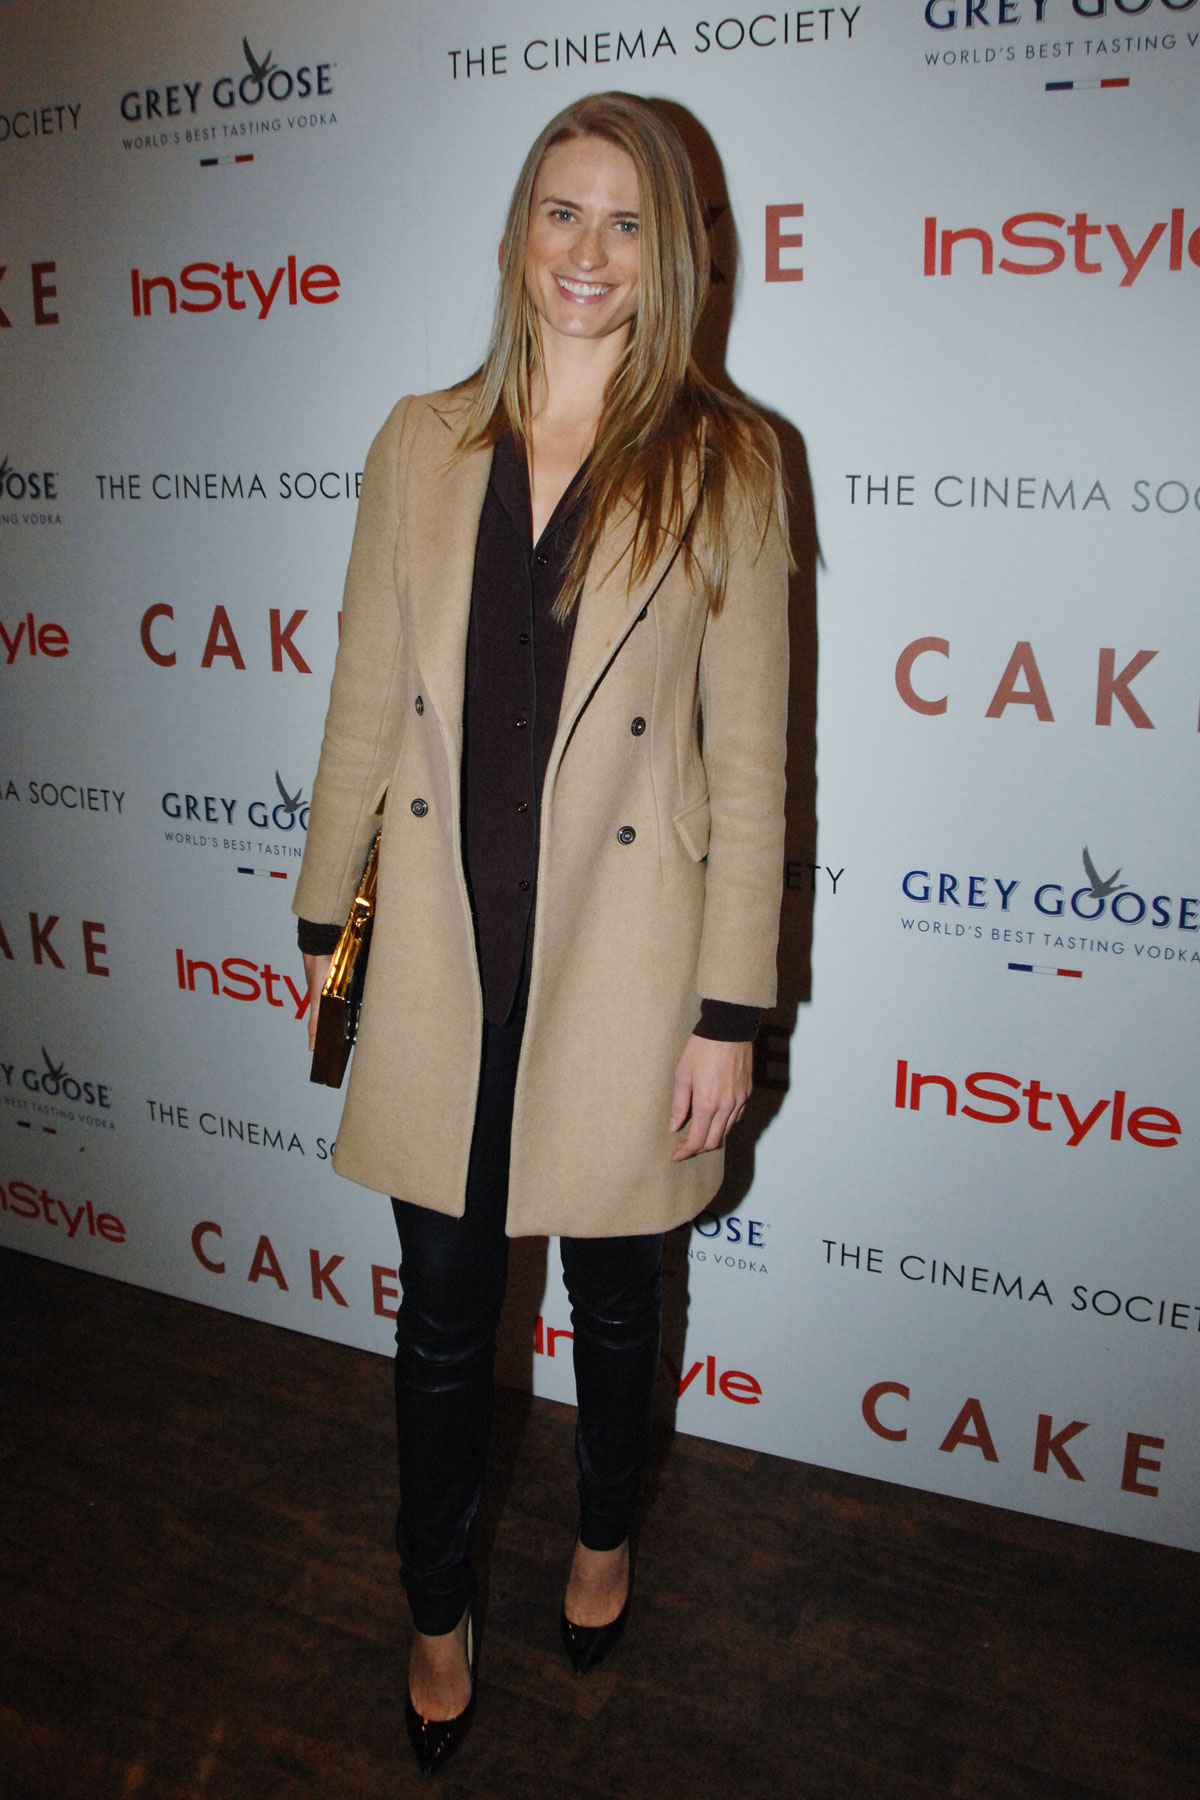 Julie Henderson attends The Cinema Society & InStyle screening